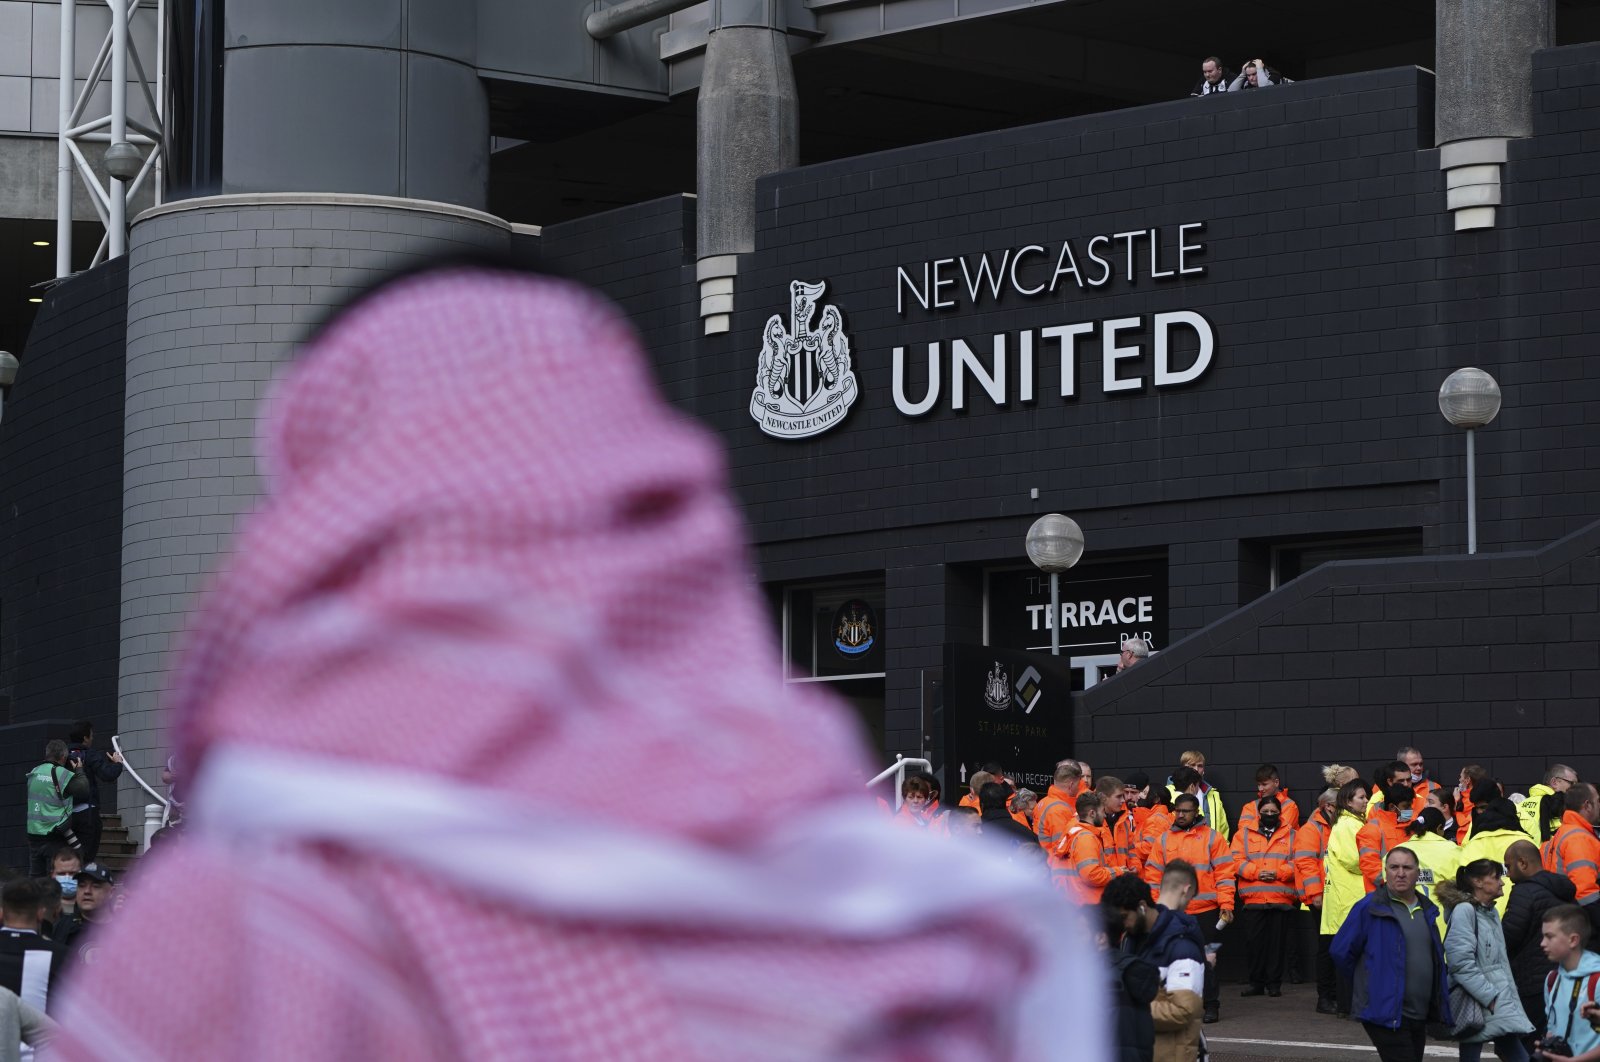 A man with a Saudi Arabian headdress passes by the St. James&#039; Park in Newcastle, England, Oct. 17, 2021. (AP Photo)